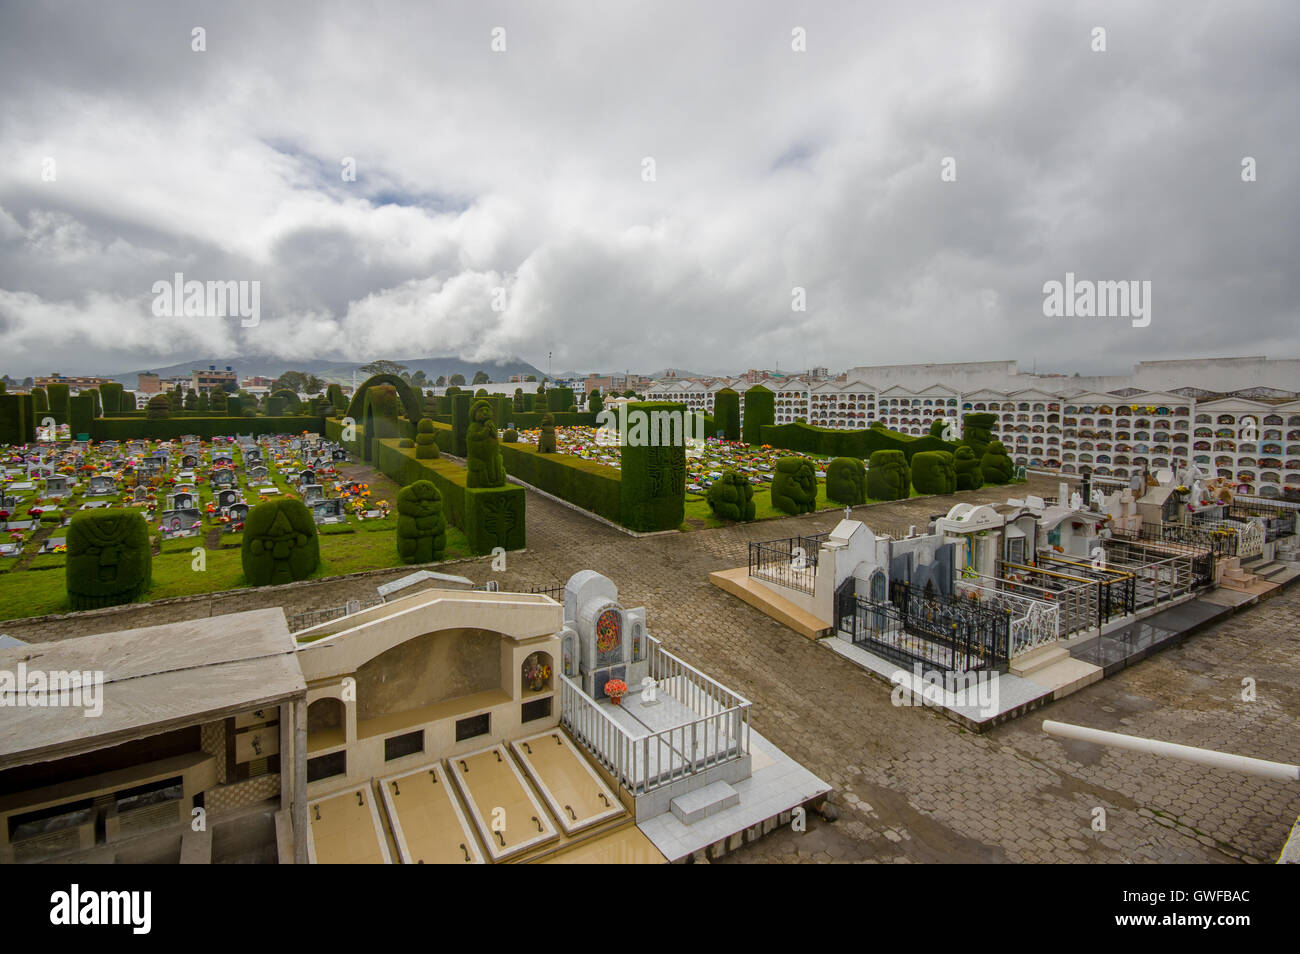 TULCAN, ECUADOR - JULY 3, 2016: nice aerial view of the topiary located inside the cemetery Stock Photo